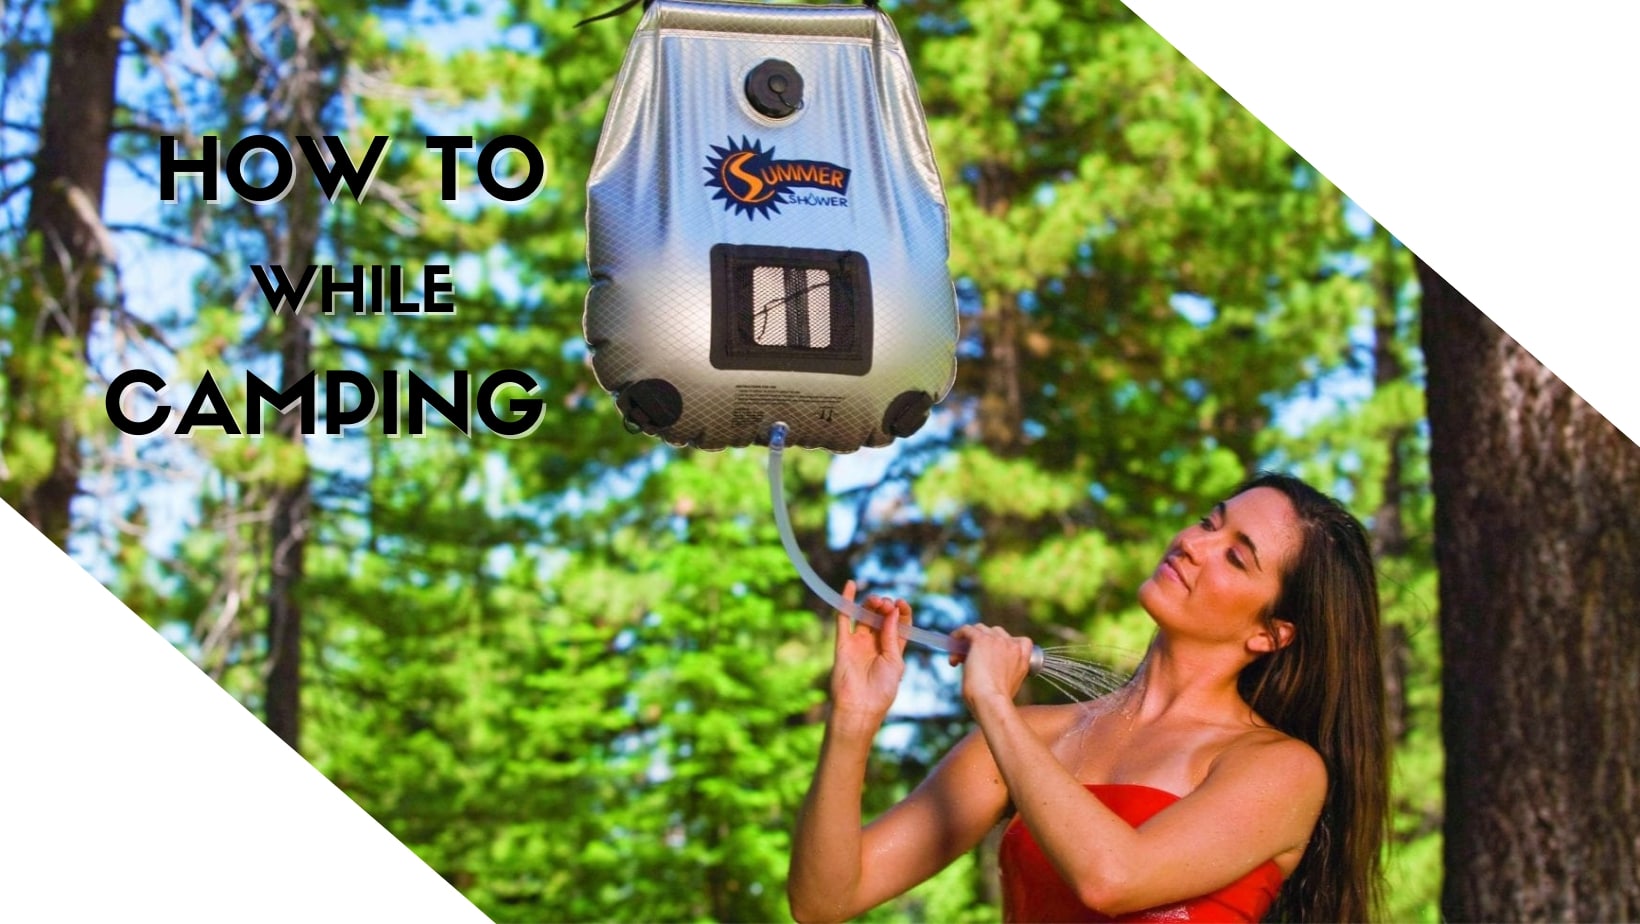 How to shower while camping